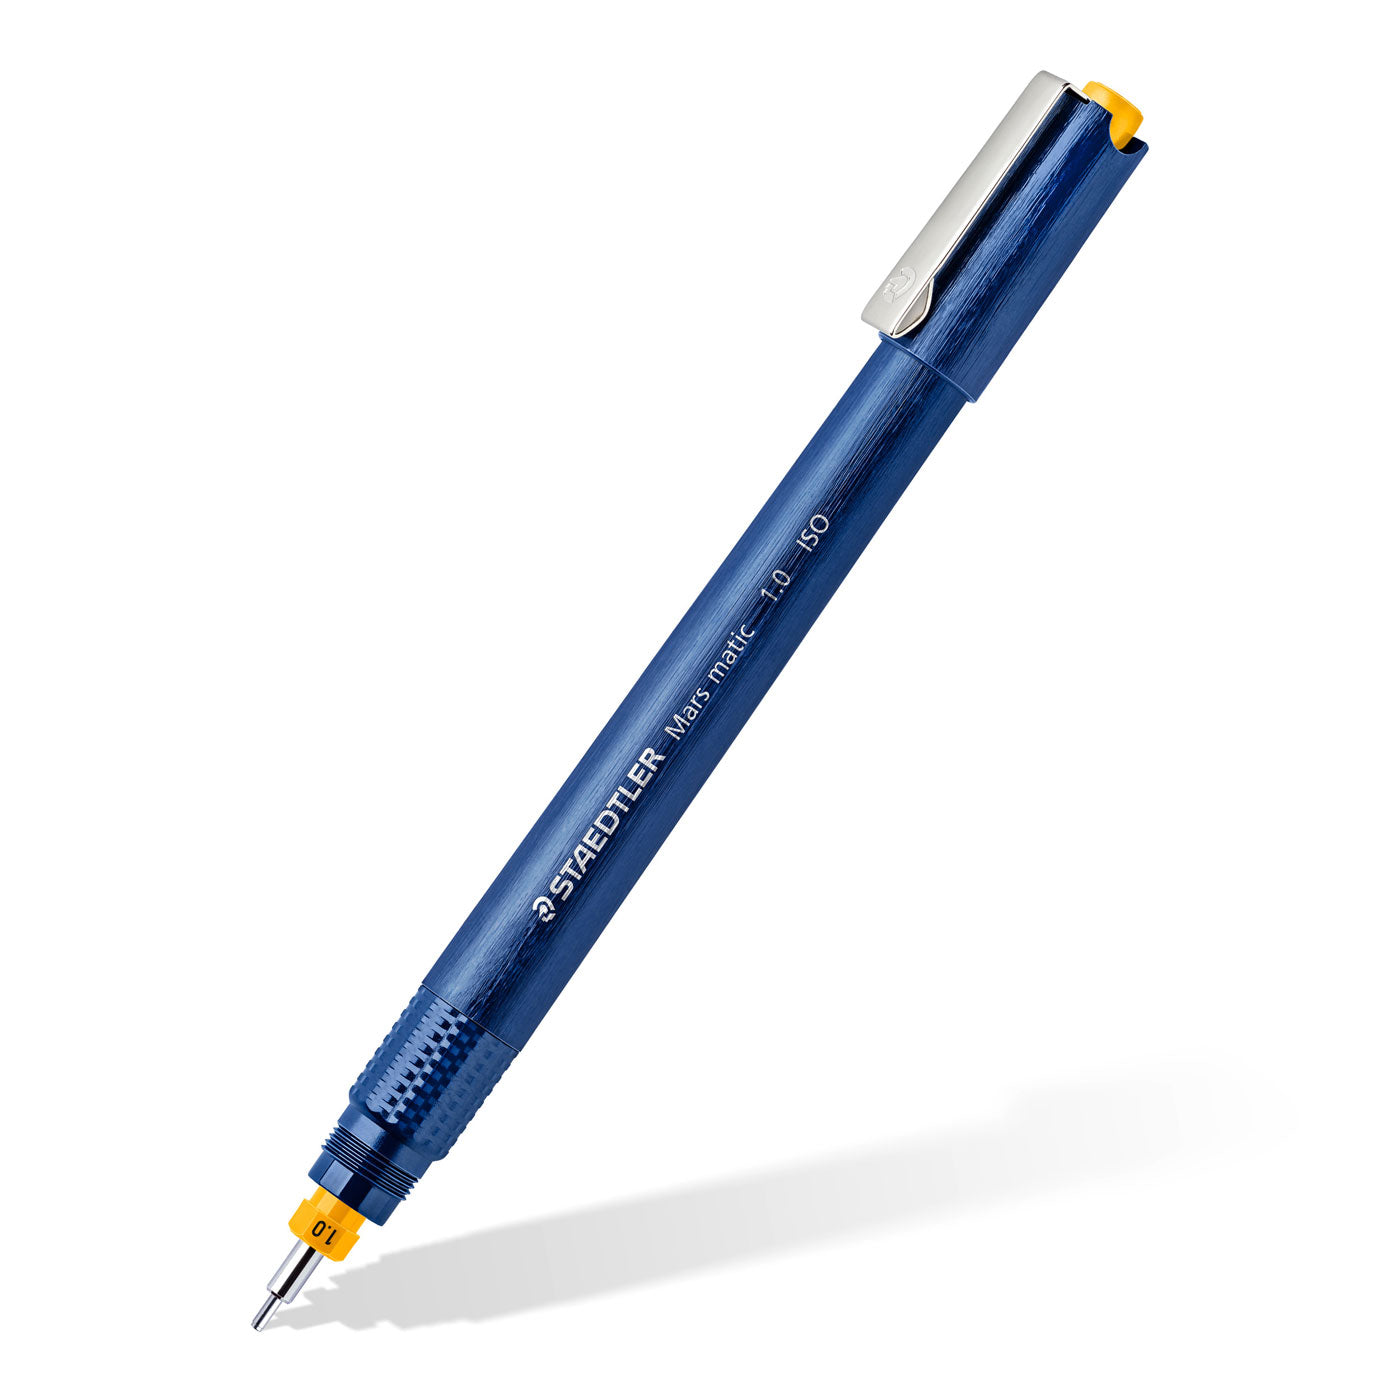 Staedtler Mars Matic 700 M10 Technical Drawing Pen 1.0mm